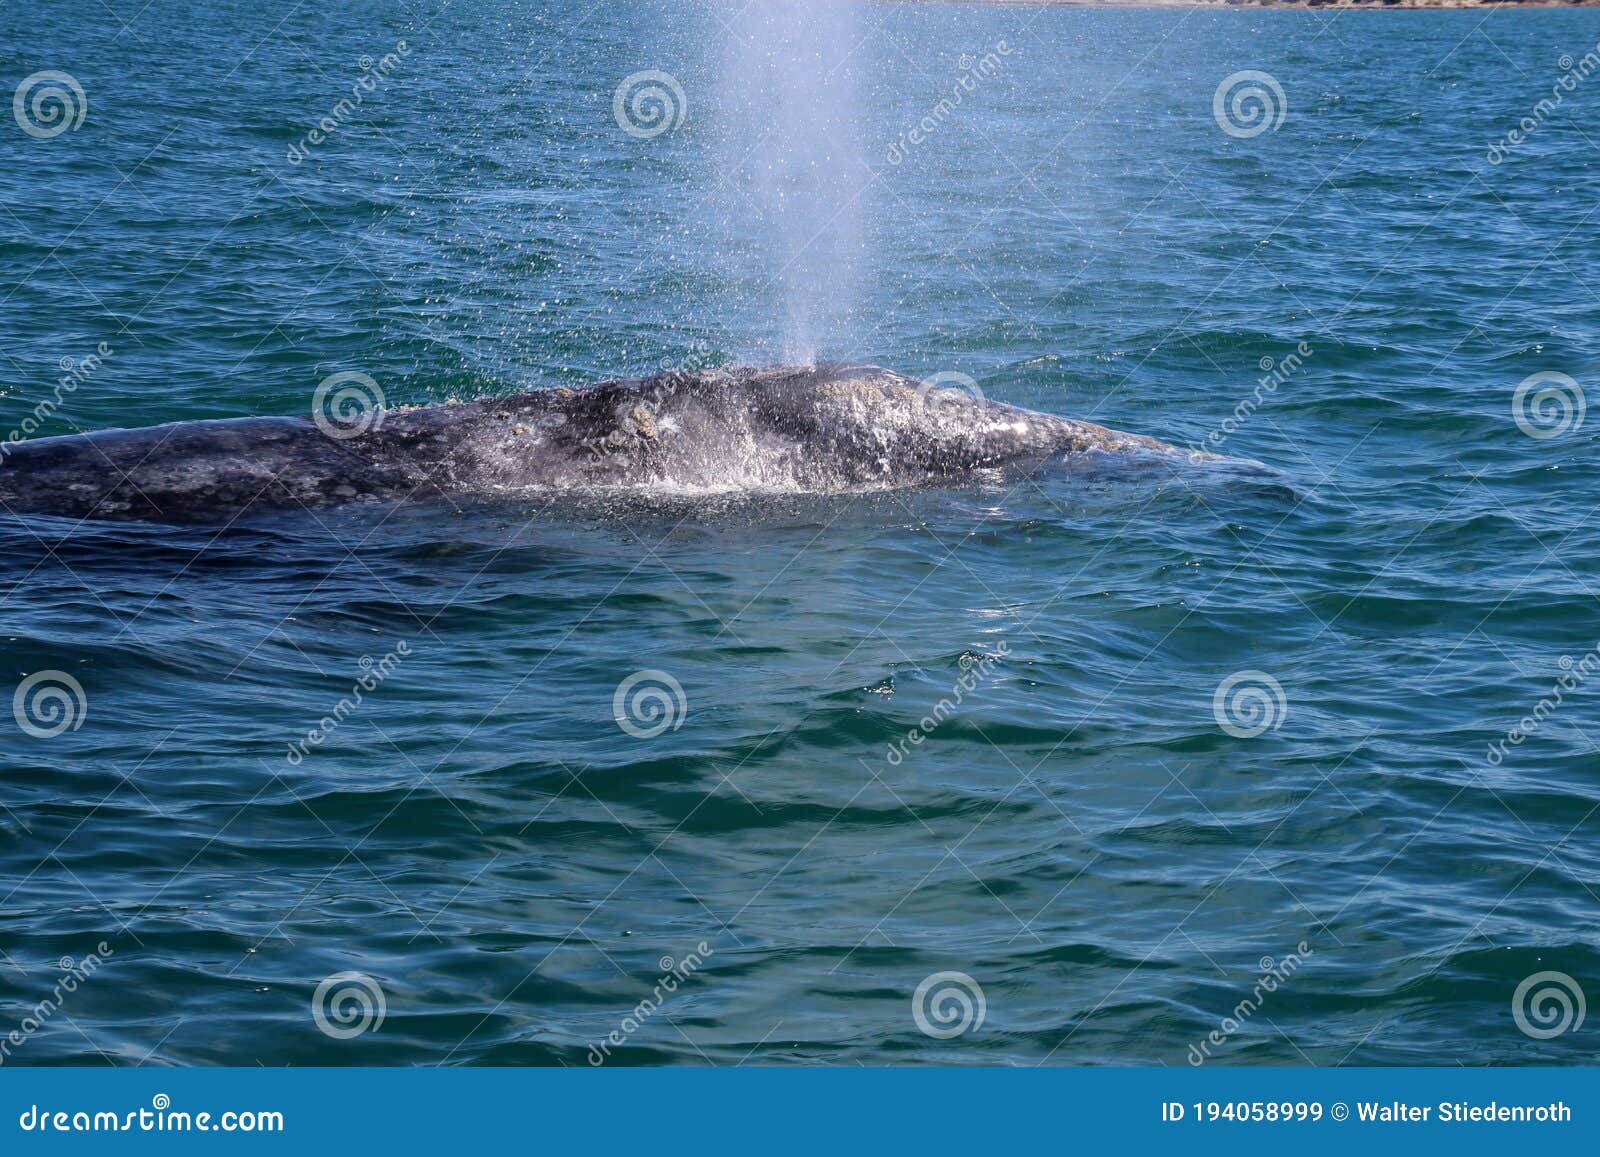 whale watching in mexico, baja california sur